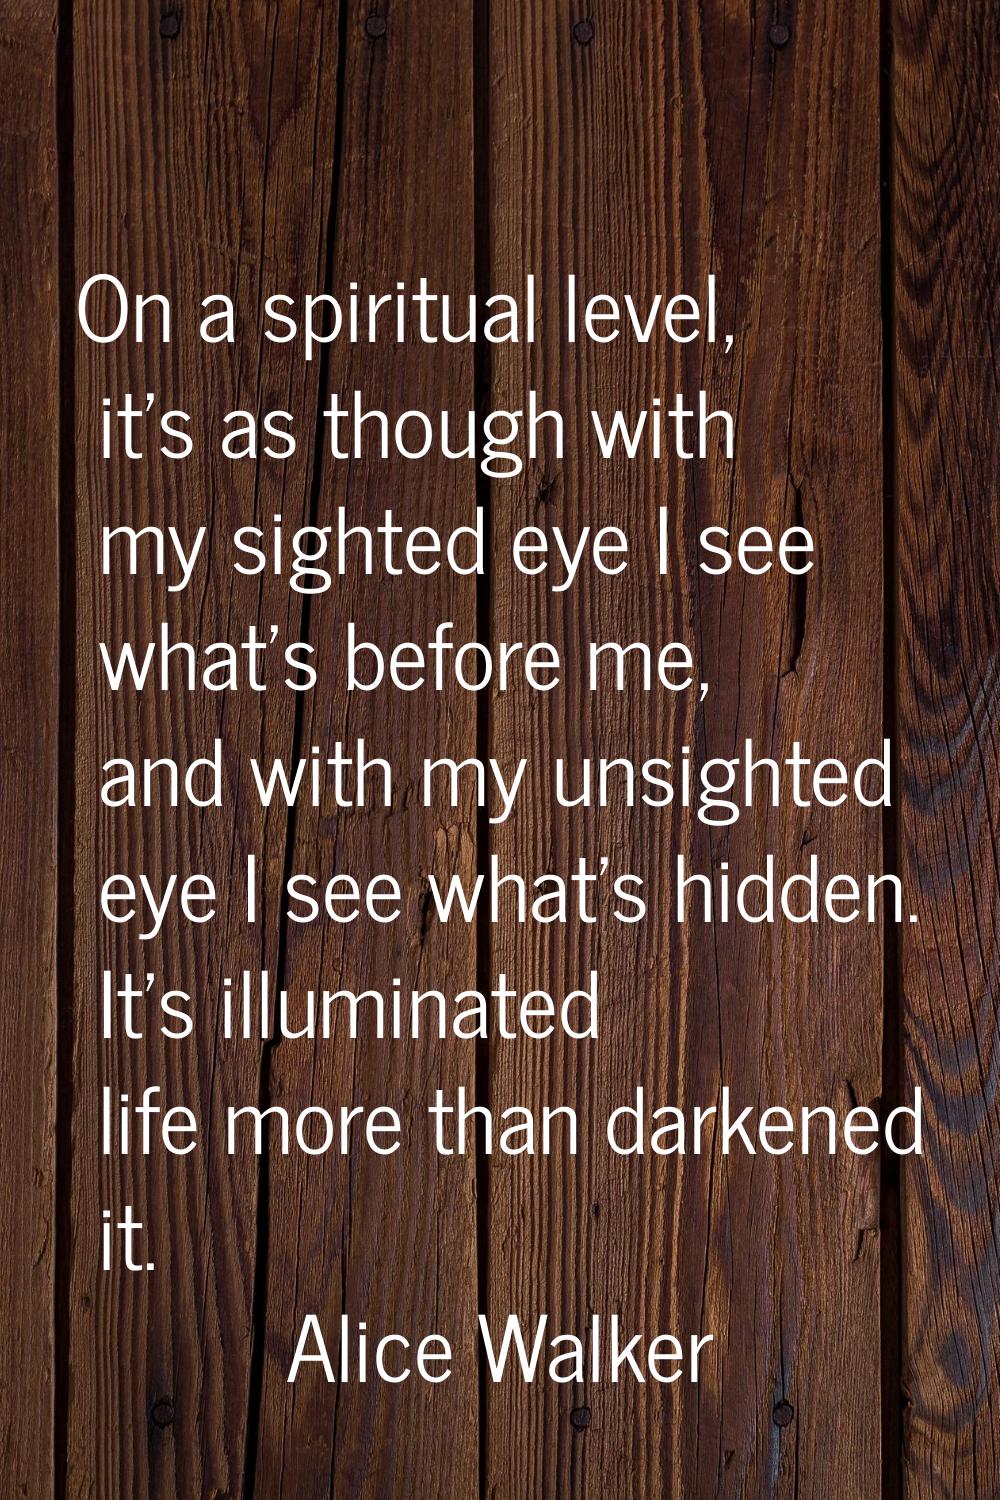 On a spiritual level, it's as though with my sighted eye I see what's before me, and with my unsigh